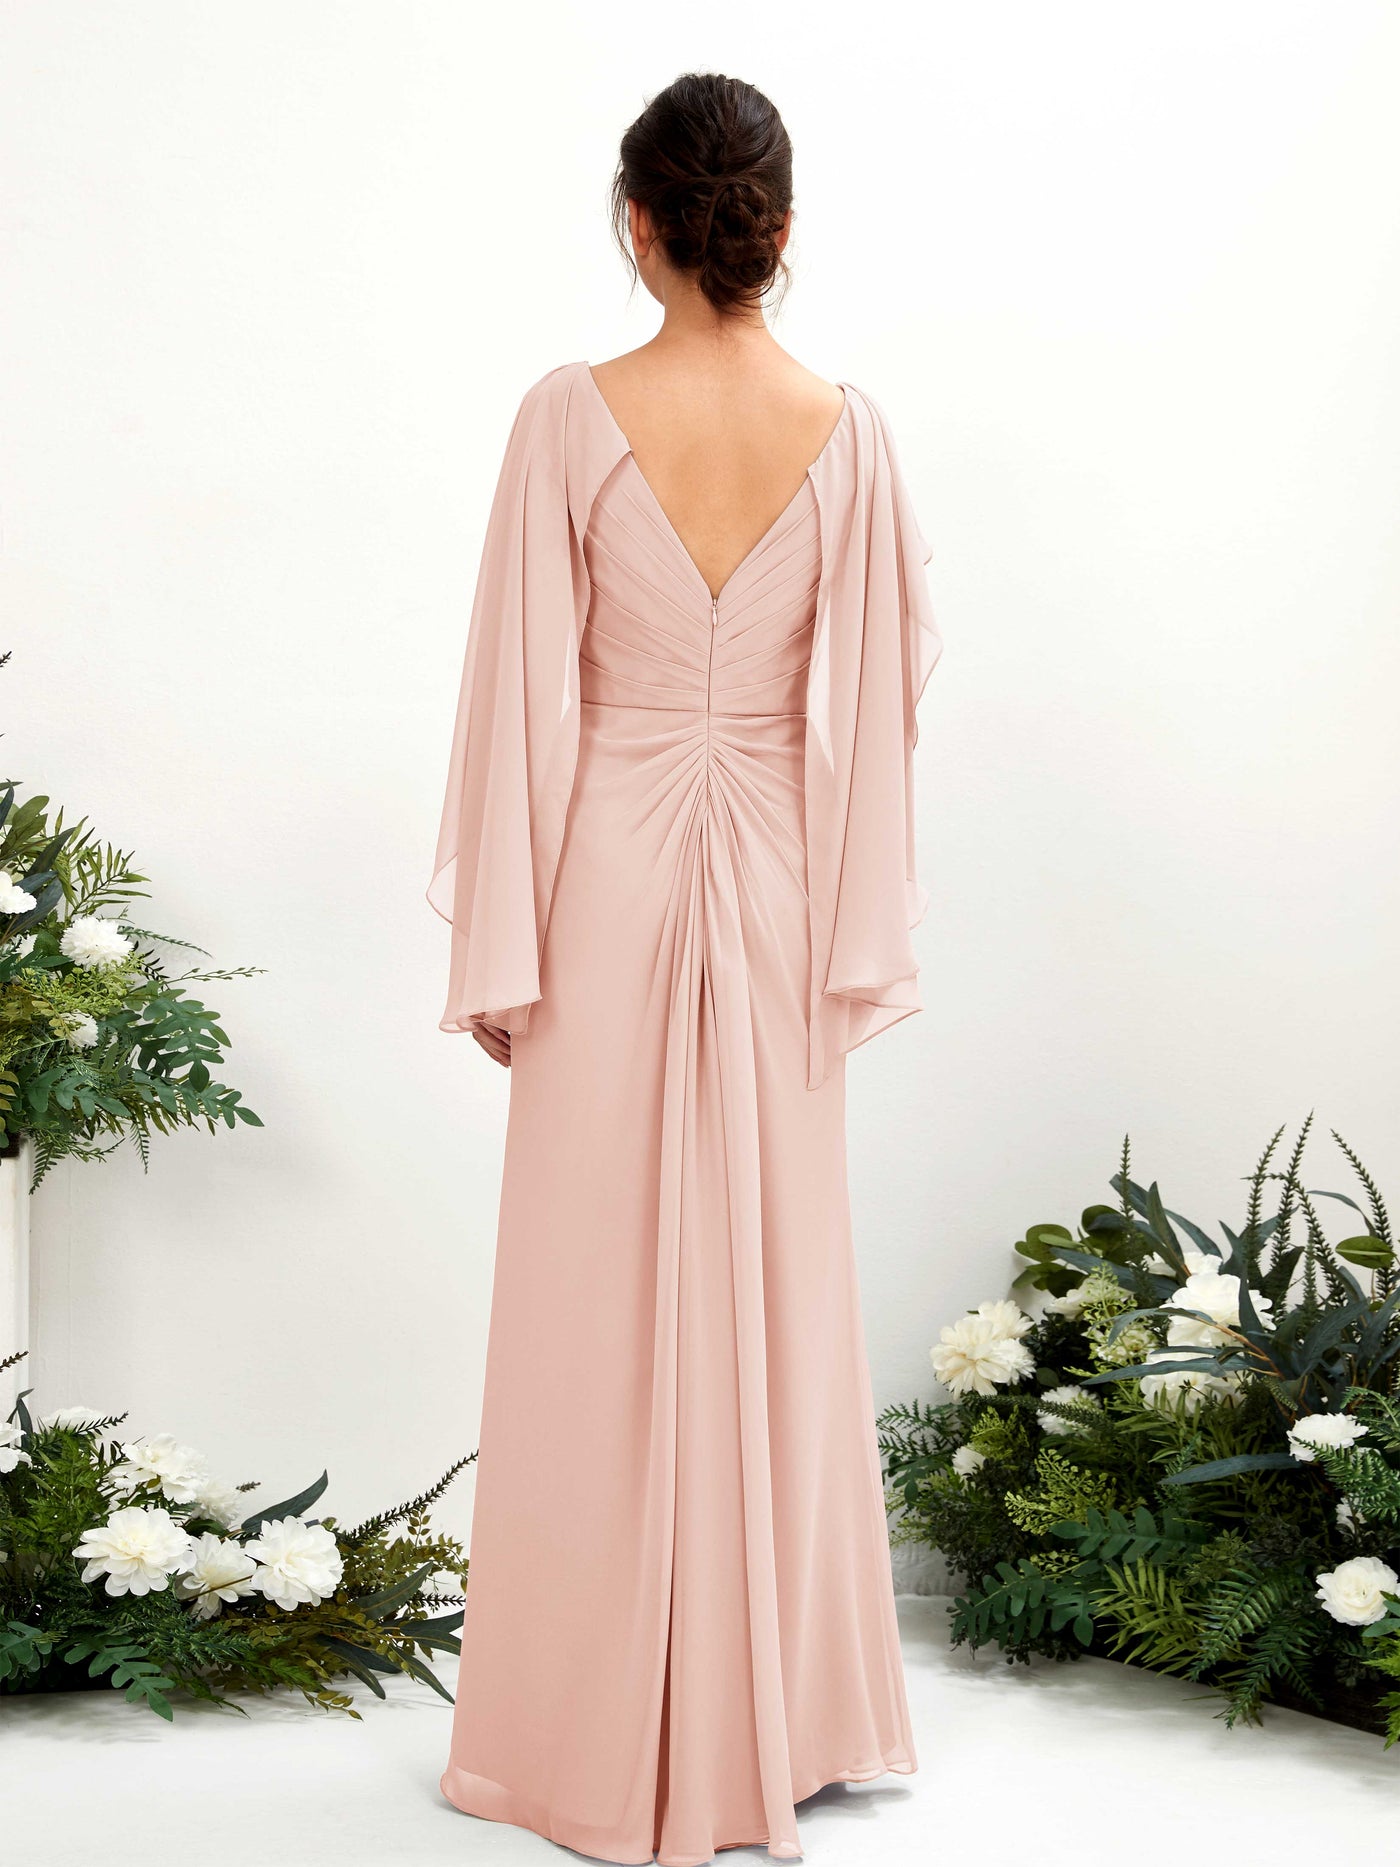 Pearl Pink Bridesmaid Dresses Bridesmaid Dress A-line Chiffon Straps Full Length Long Sleeves Wedding Party Dress (80220108)#color_pearl-pink